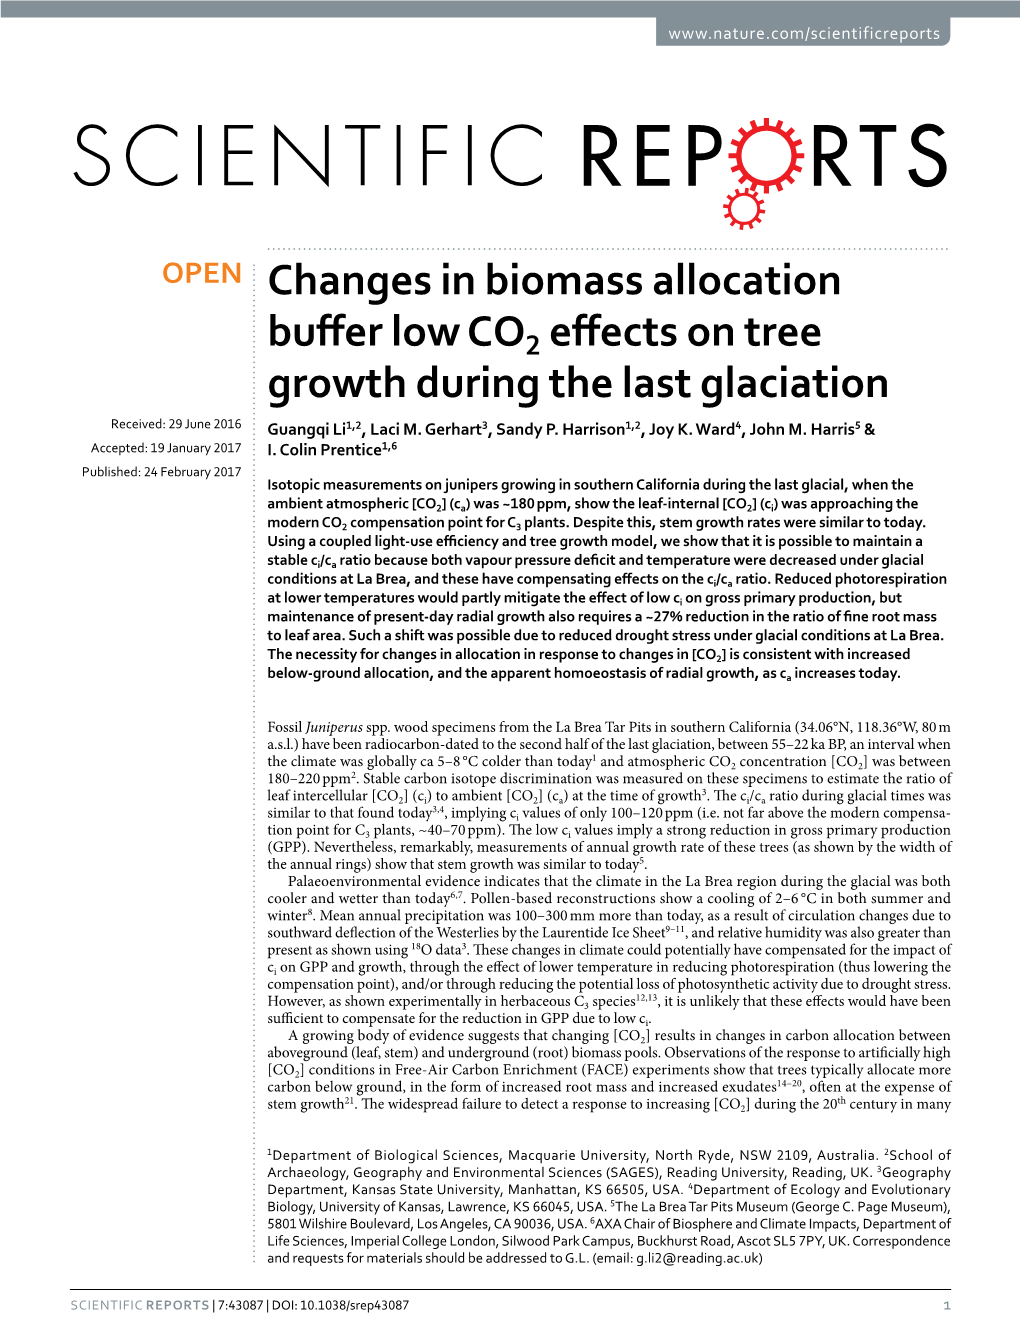 Changes in Biomass Allocation Buffer Low CO2 Effects on Tree Growth During the Last Glaciation Received: 29 June 2016 Guangqi Li1,2, Laci M